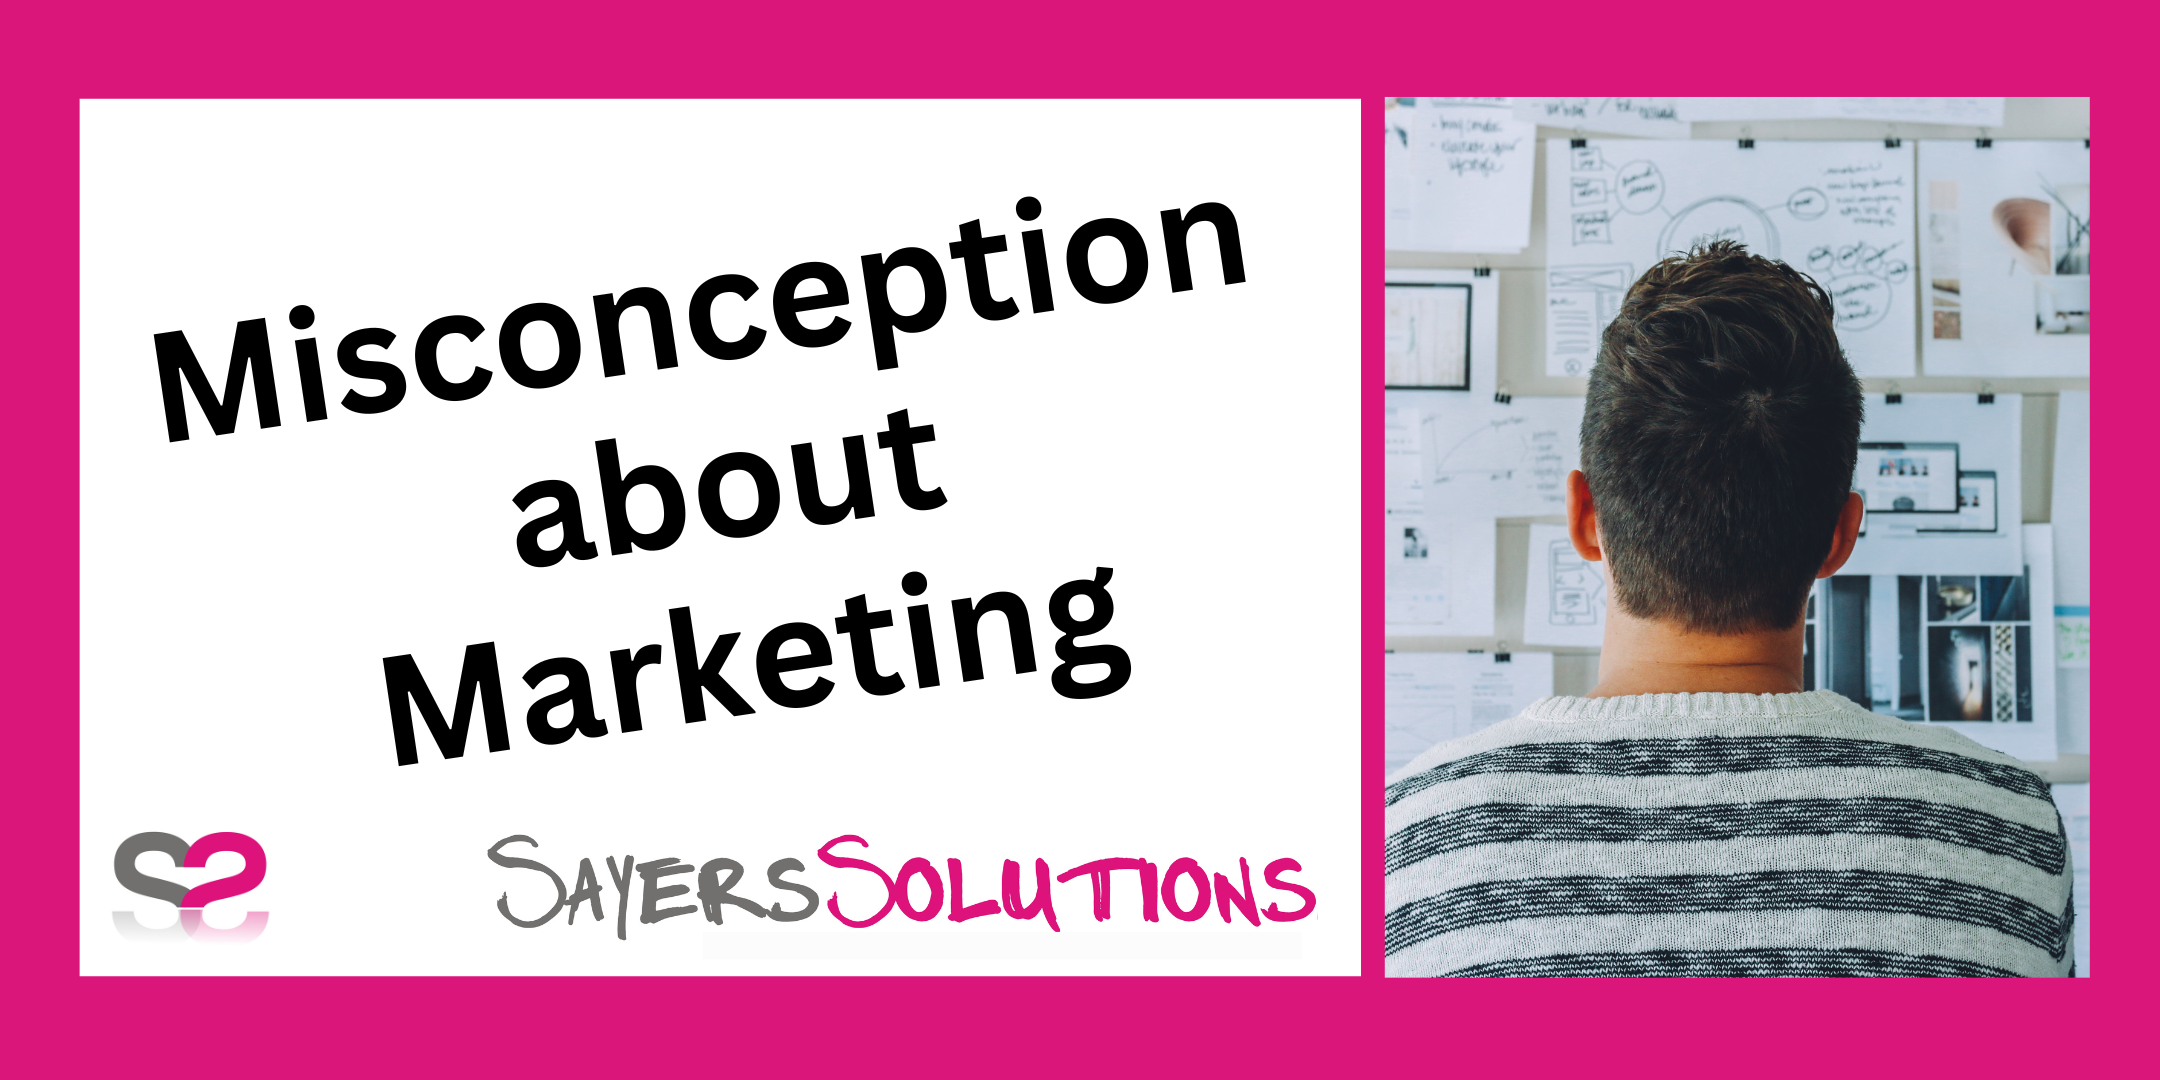 Misconception about Marketing